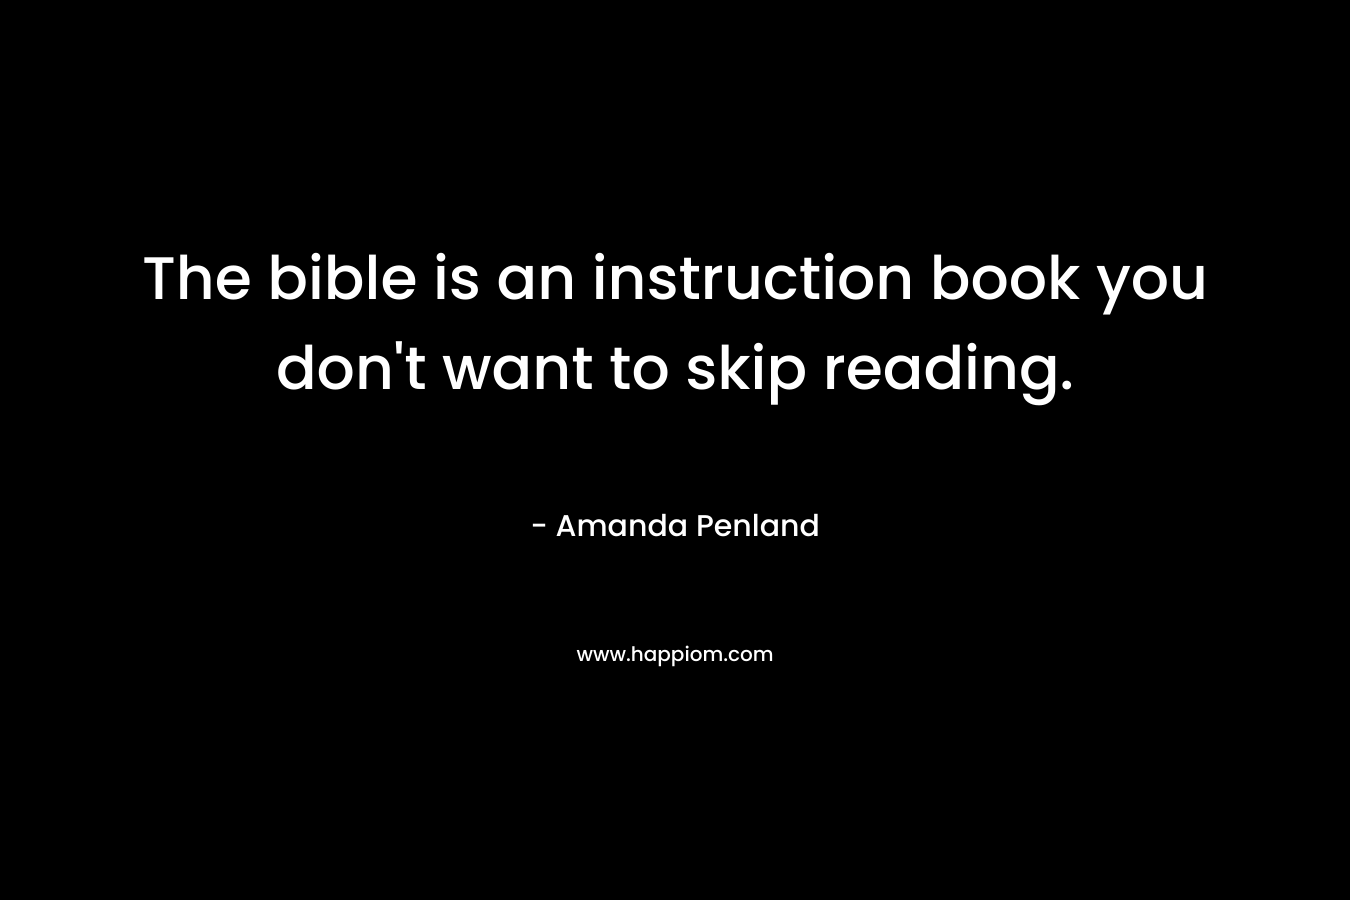 The bible is an instruction book you don’t want to skip reading. – Amanda Penland